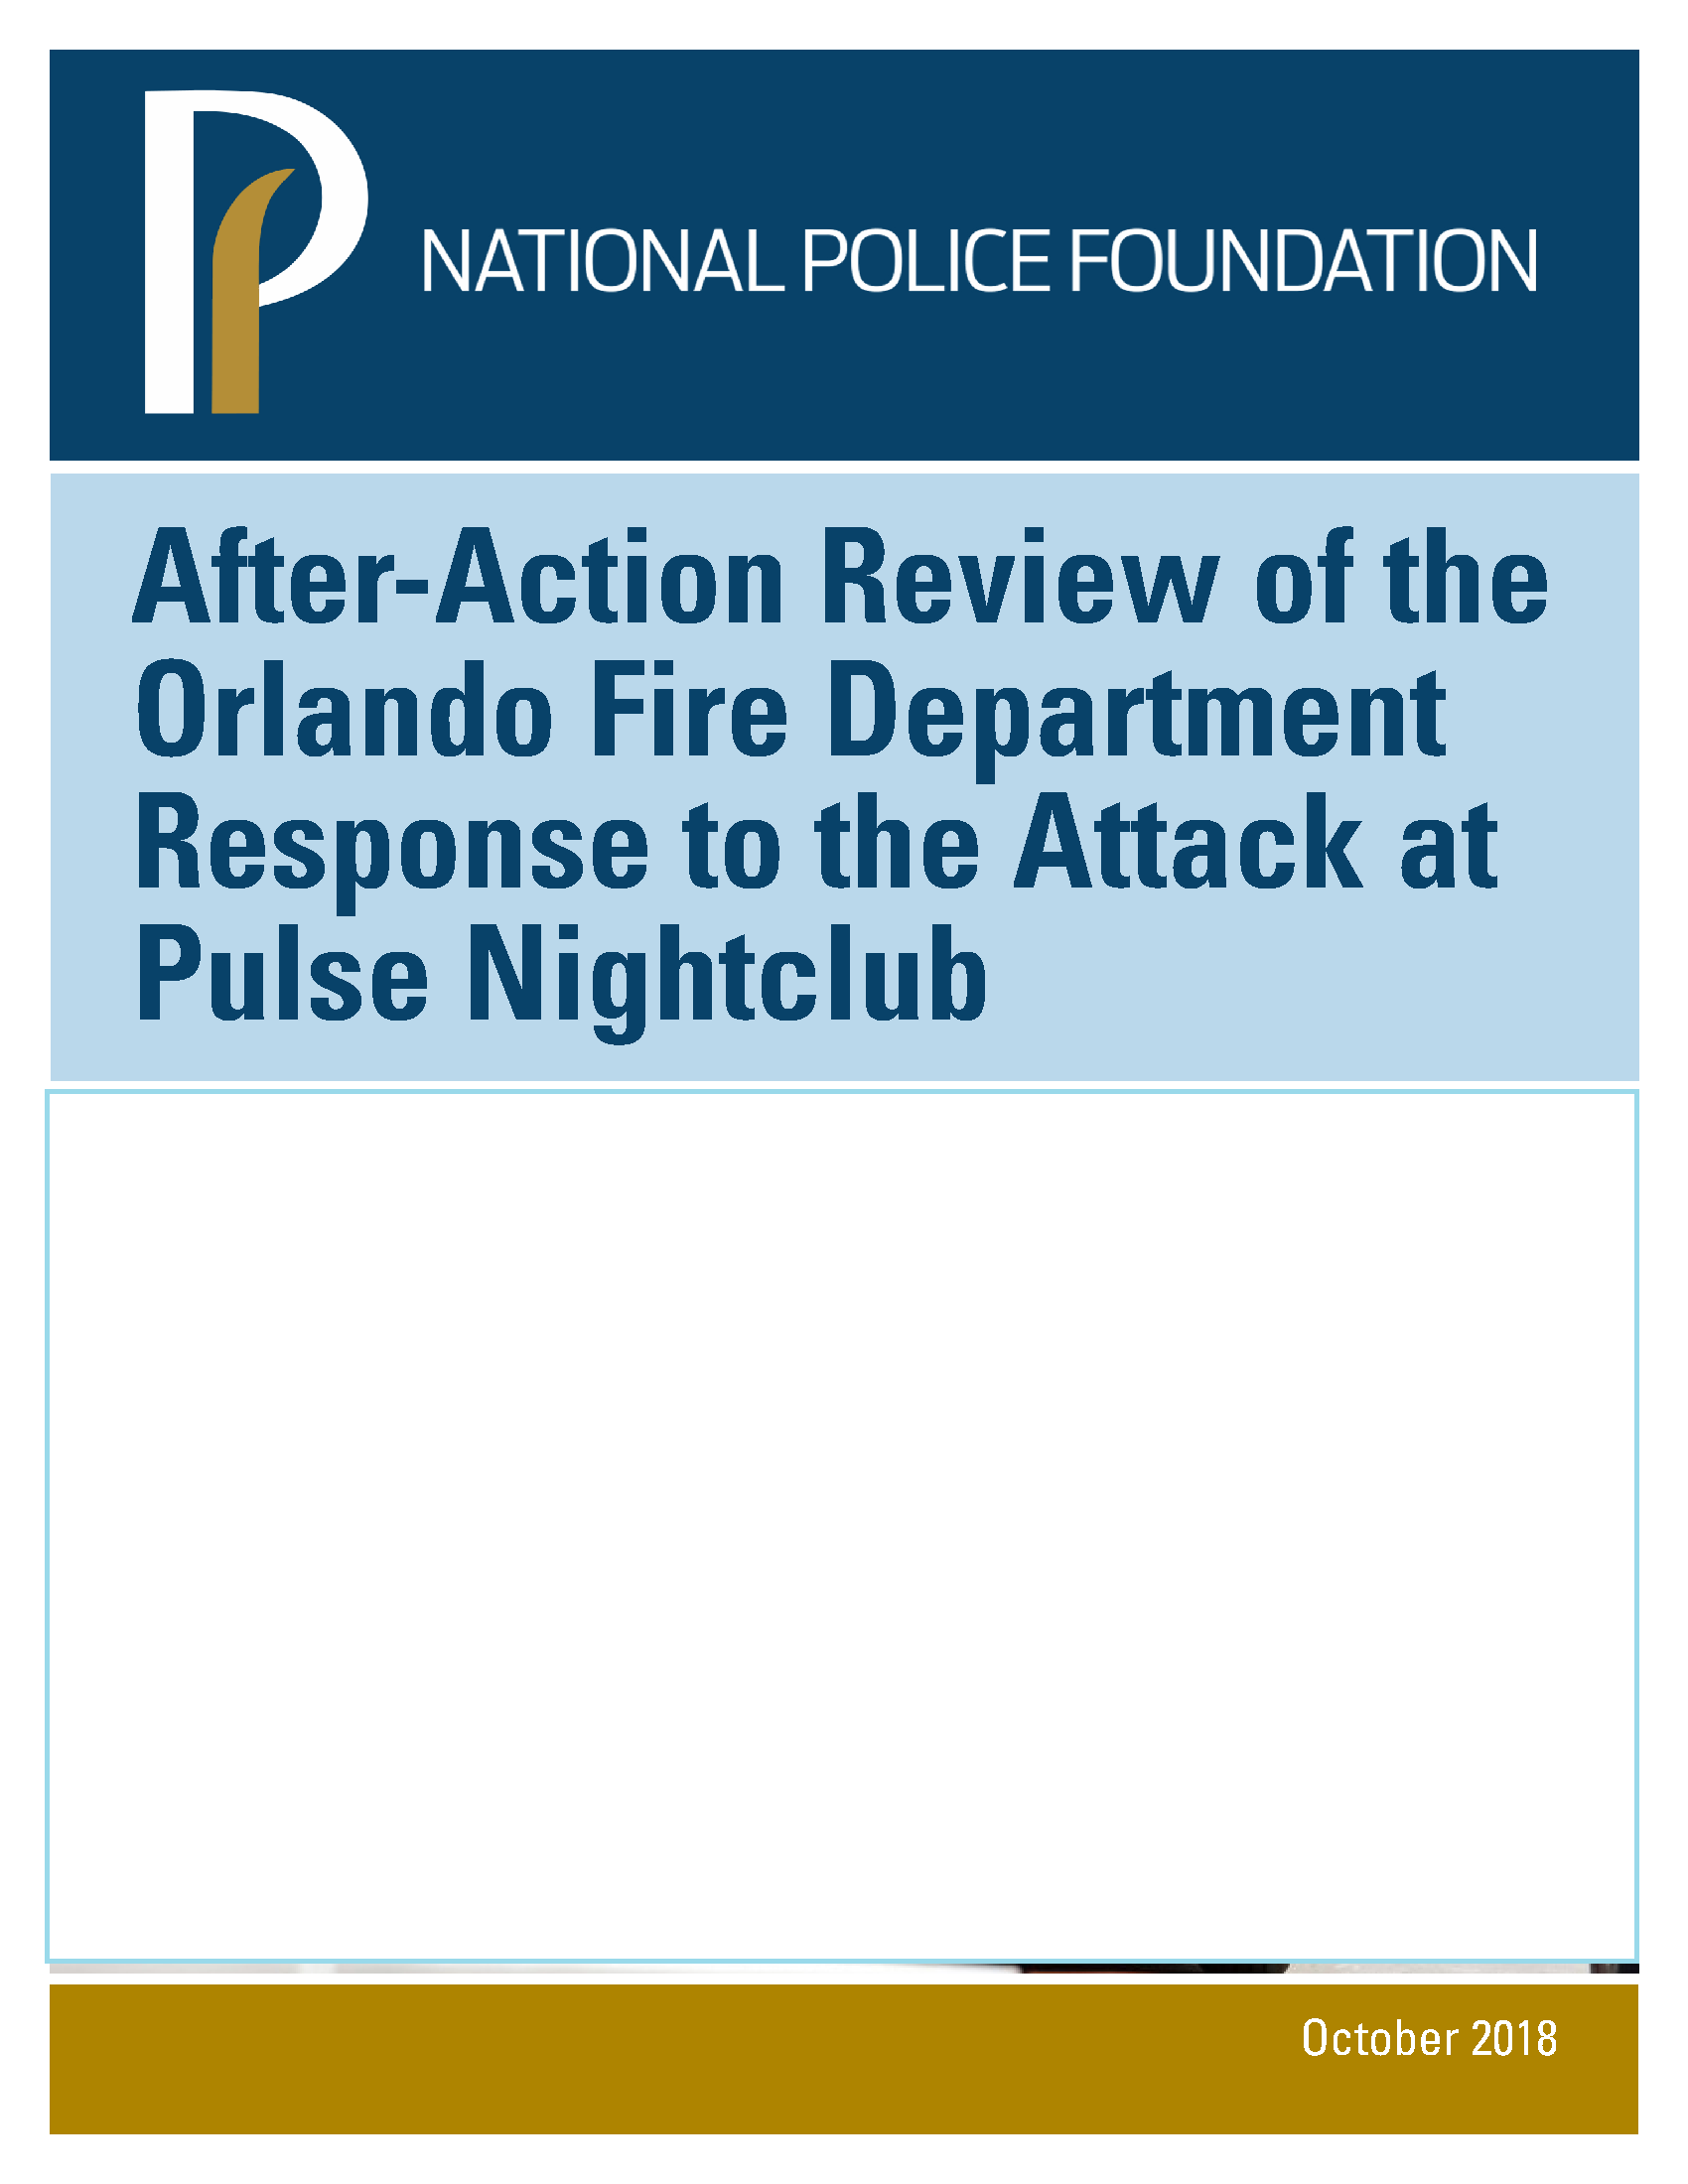 RaCERS Director Contributes to National Police Foundation report on Fire/EMS response to Pulse Nightclub Attack